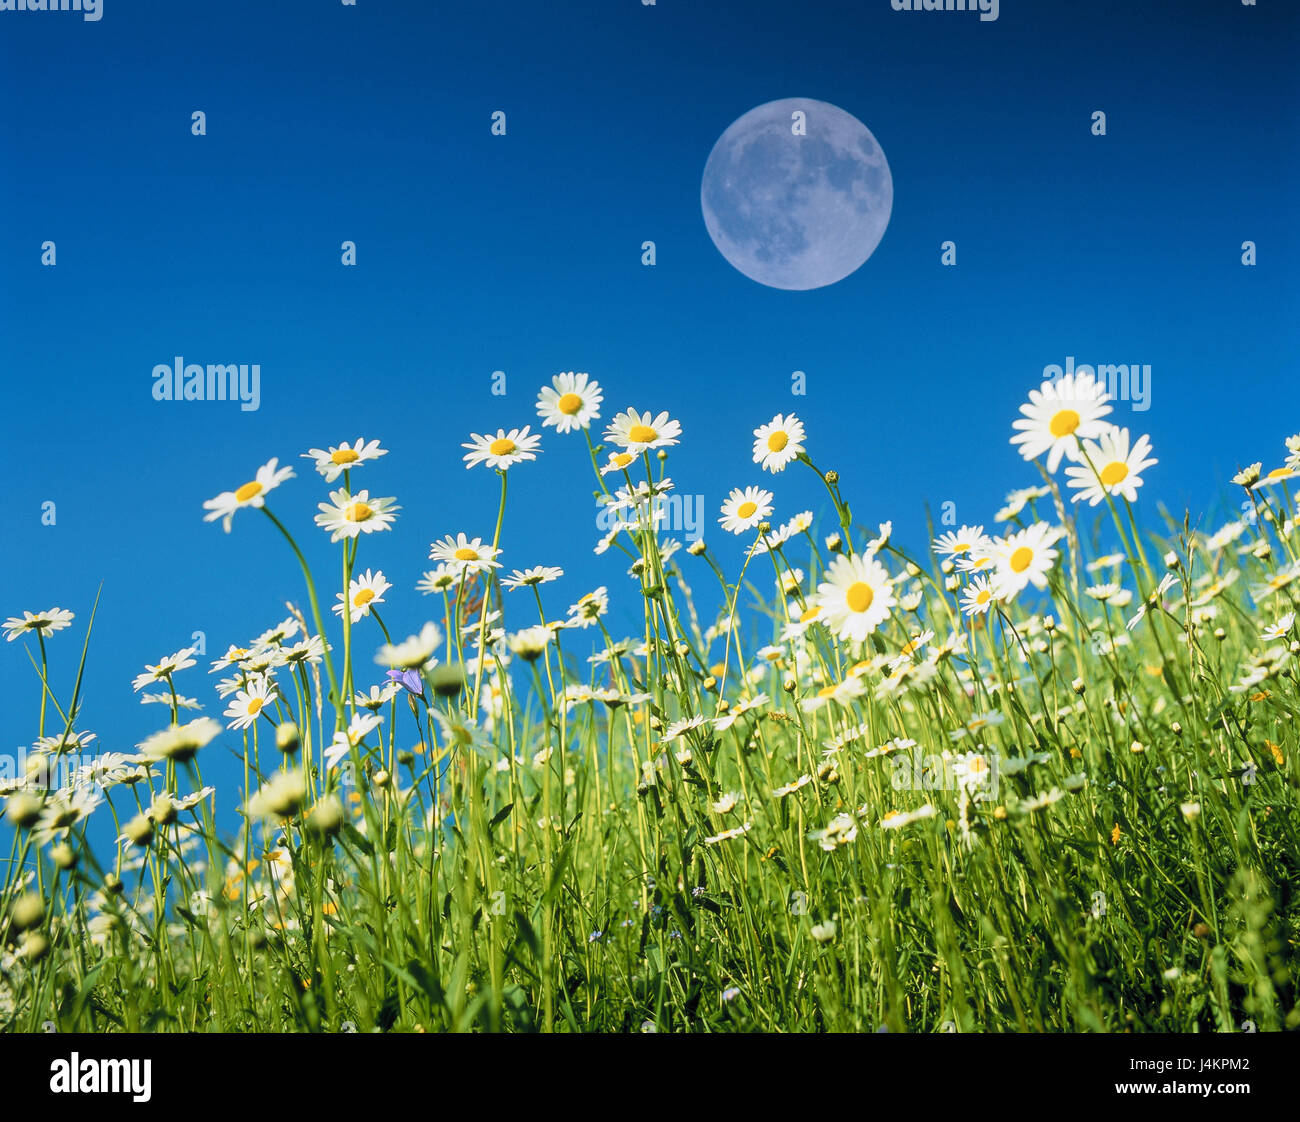 Meadow, margin rites, heavens, full moon flower meadow, summer meadow, margin rite meadow, flowers, white, summer, summer flowers, mountain pasture, nature, natural light, tag, time of day, moon, planet, unusually, phase of the moon, season, sunshine, blue, cloudless, [M] Stock Photo